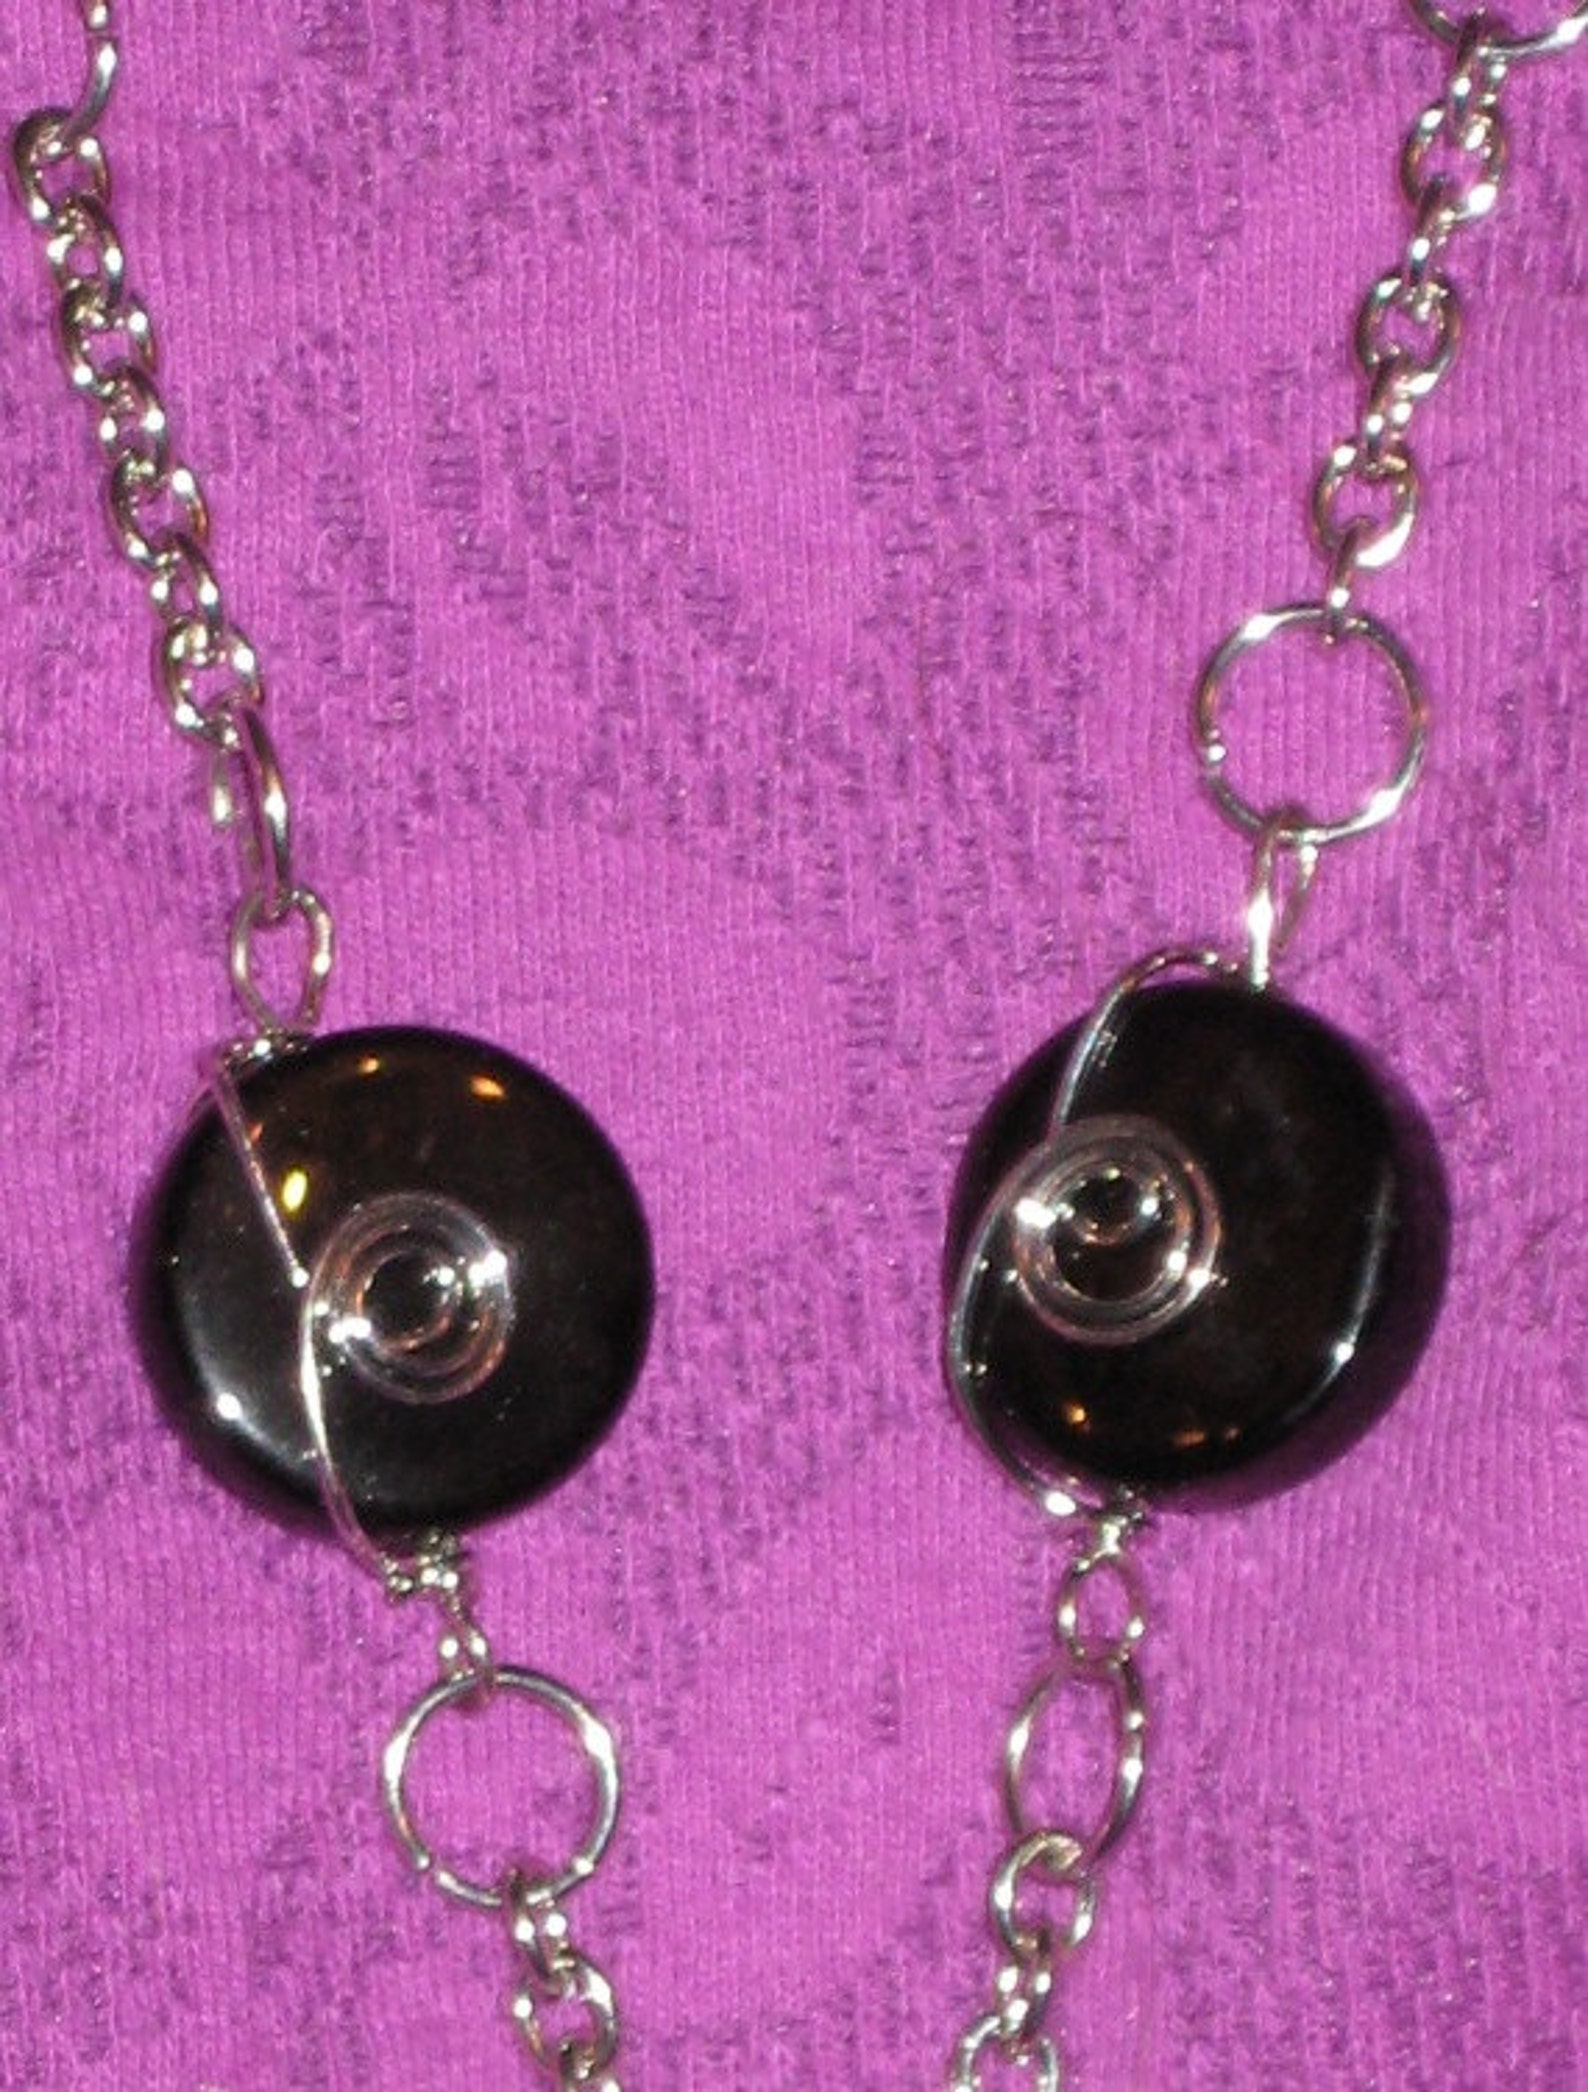 Necklace Lanyard With Retractable Reel & Magnetic Clasp - Etsy New Zealand